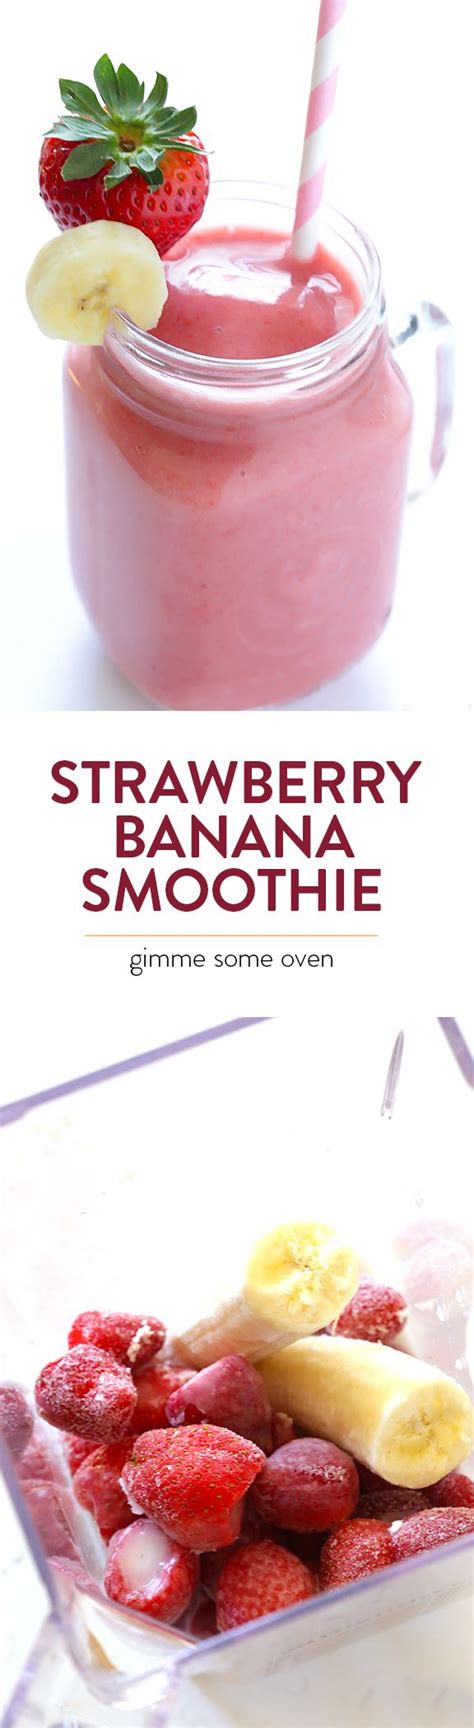 Fitness Made Easy My All Time Favorite Recipe For A Classic Strawberry Banana Smoothie Made